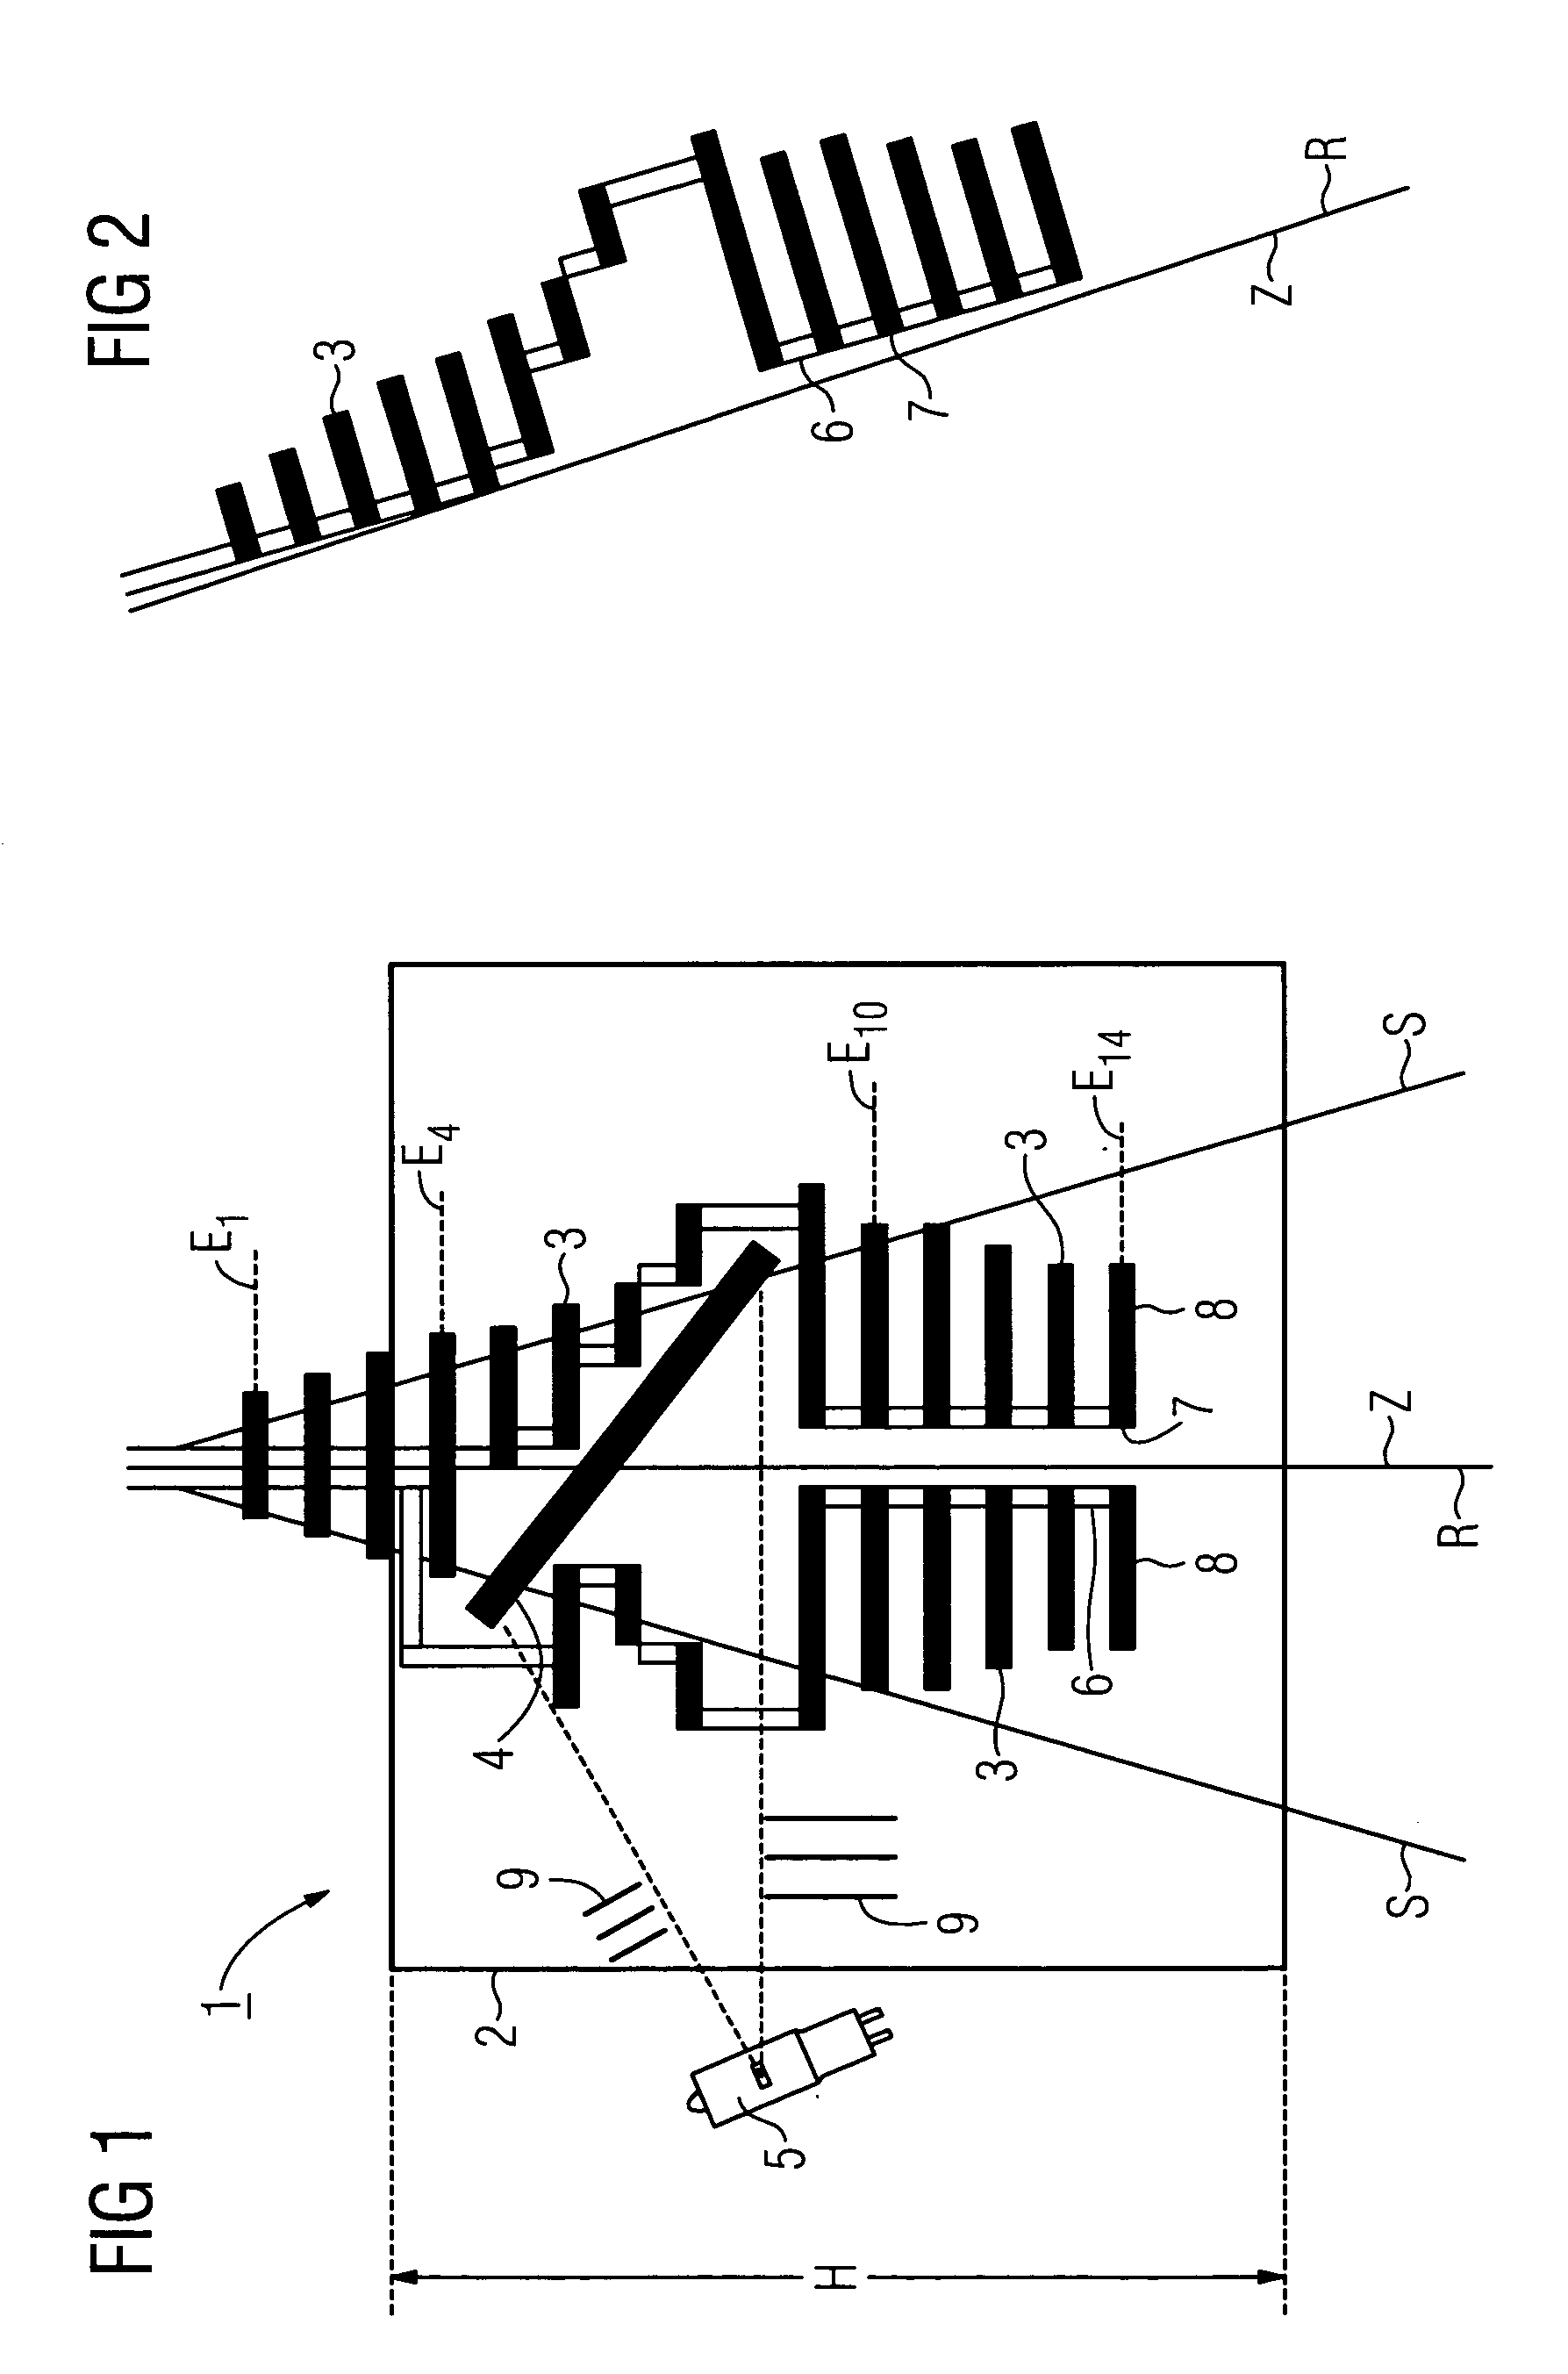 Multileaf collimator for an X-ray diagnostic device